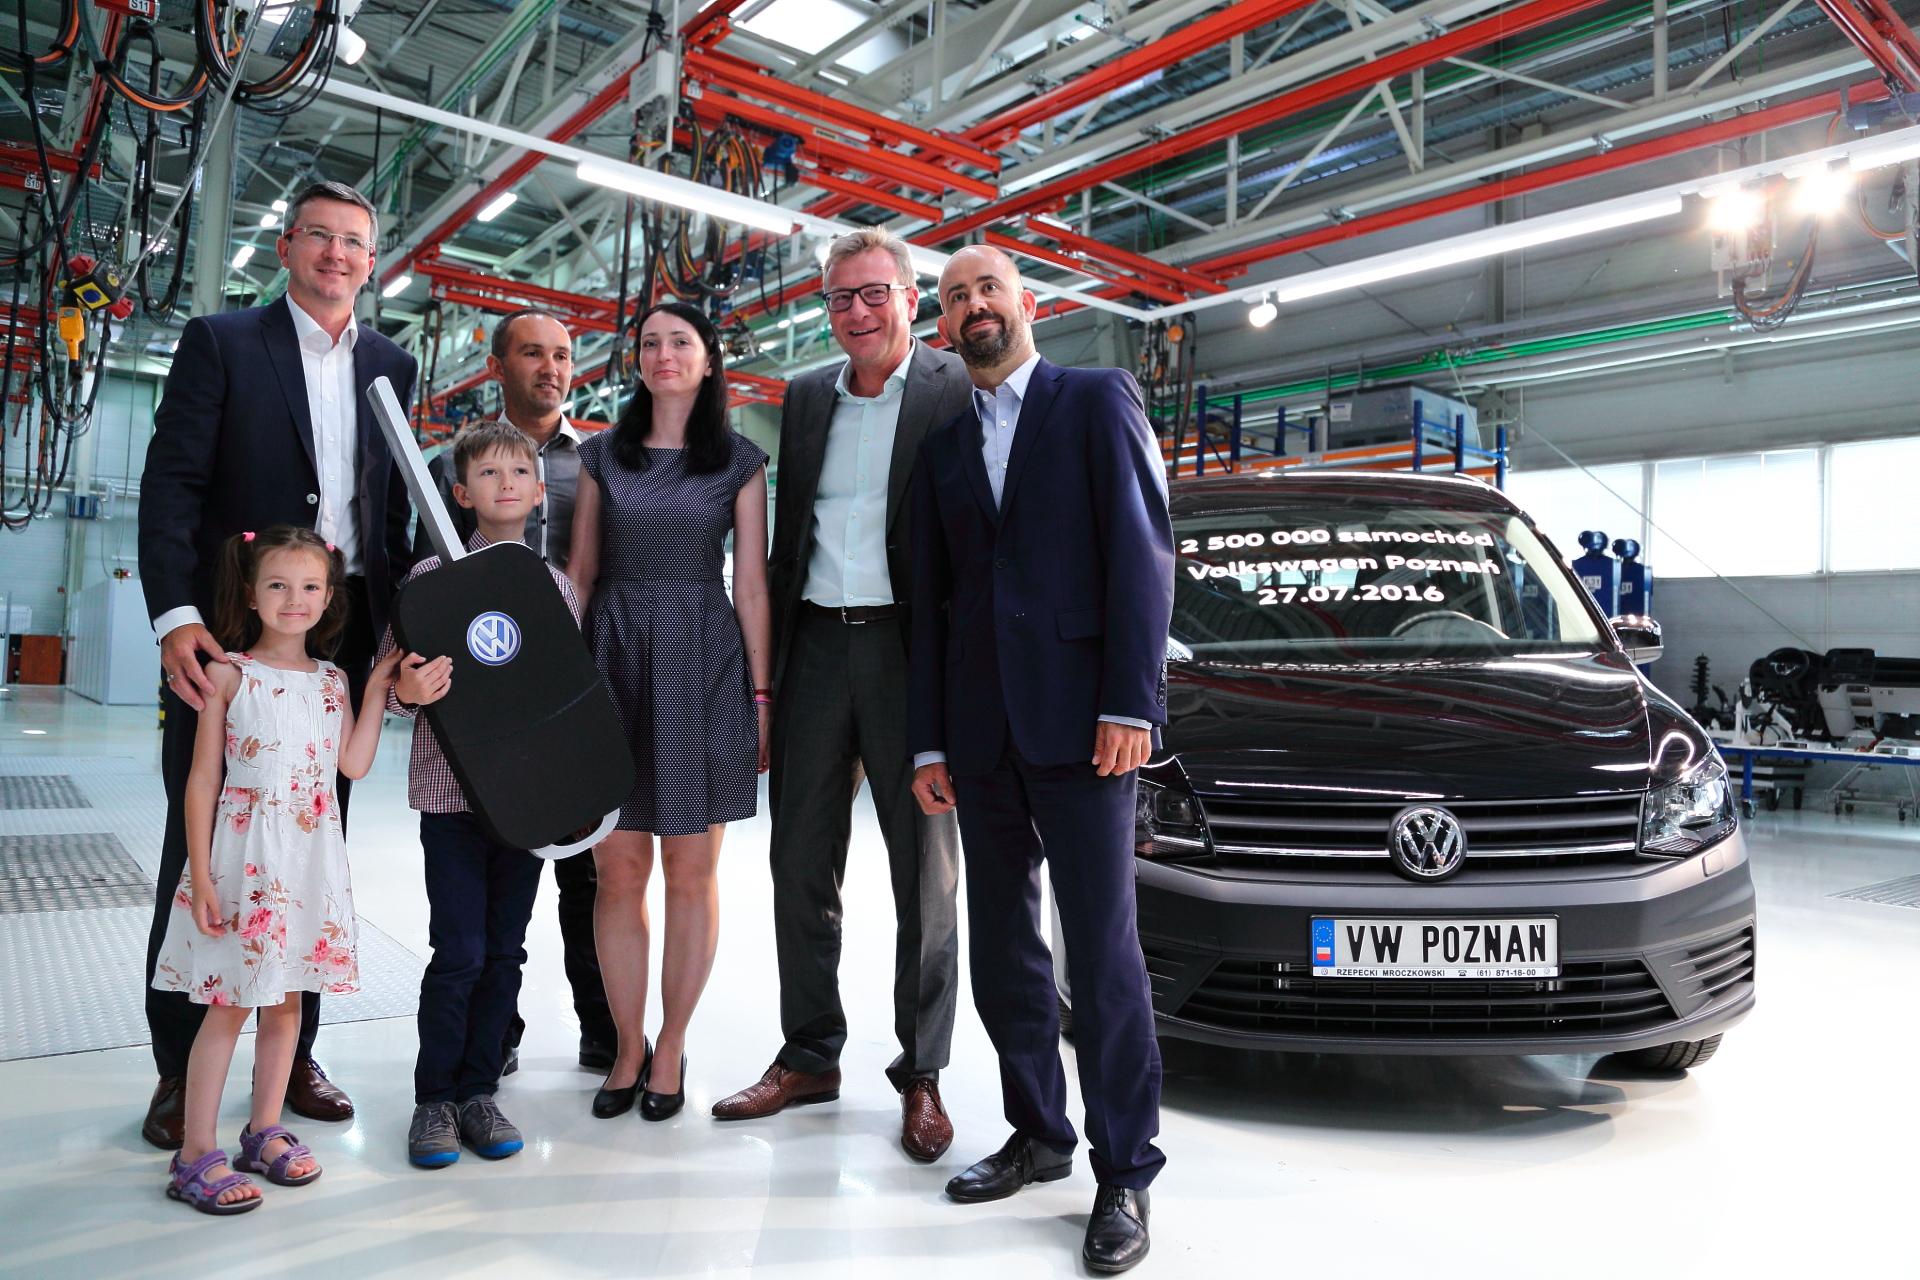 2,500,000 cars from the Volkswagen Poznań factory – image 3